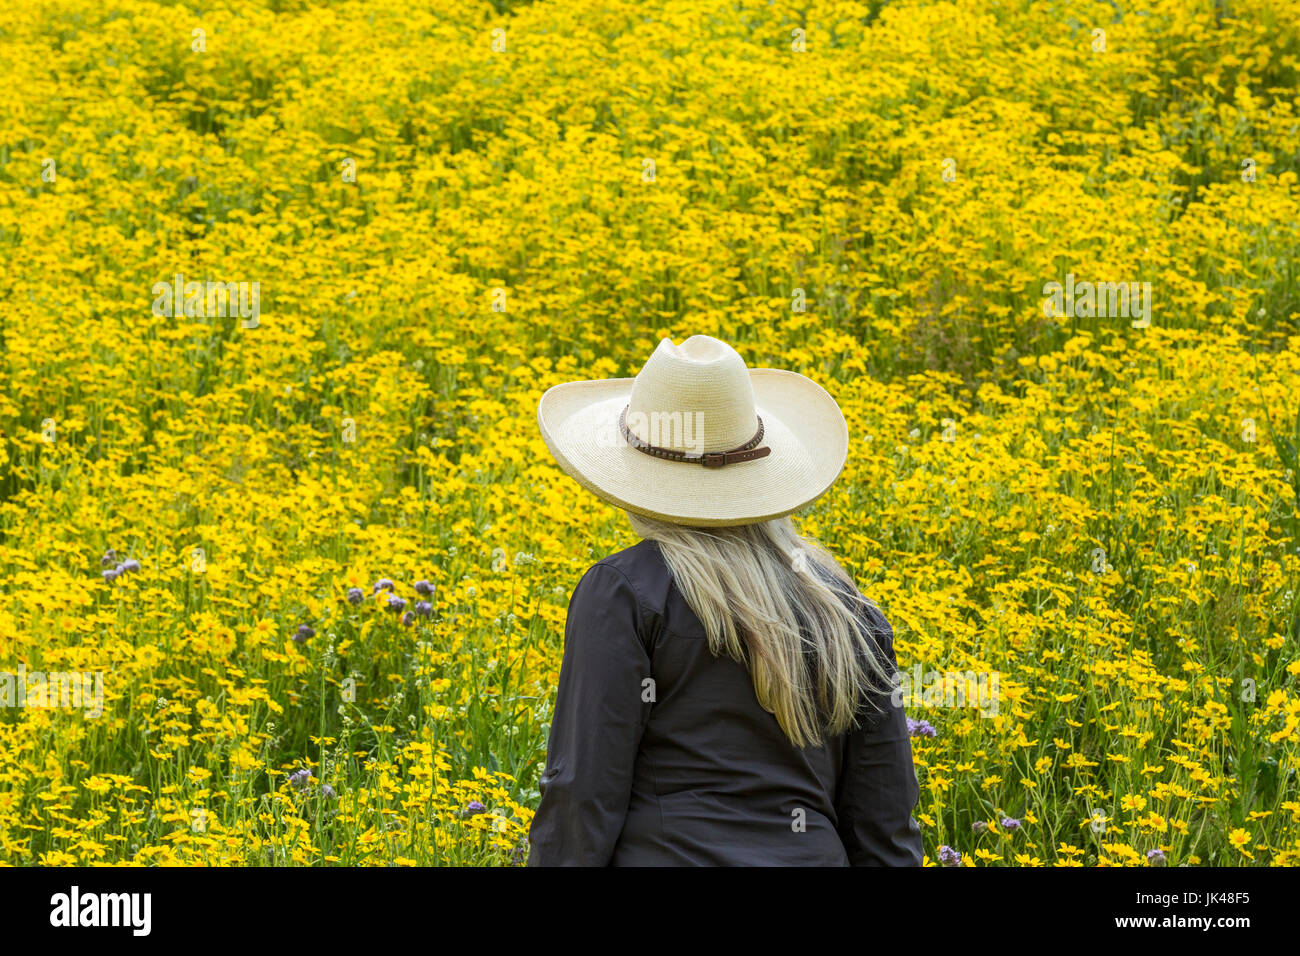 Caucasian woman in field of yellow flowers Stock Photo